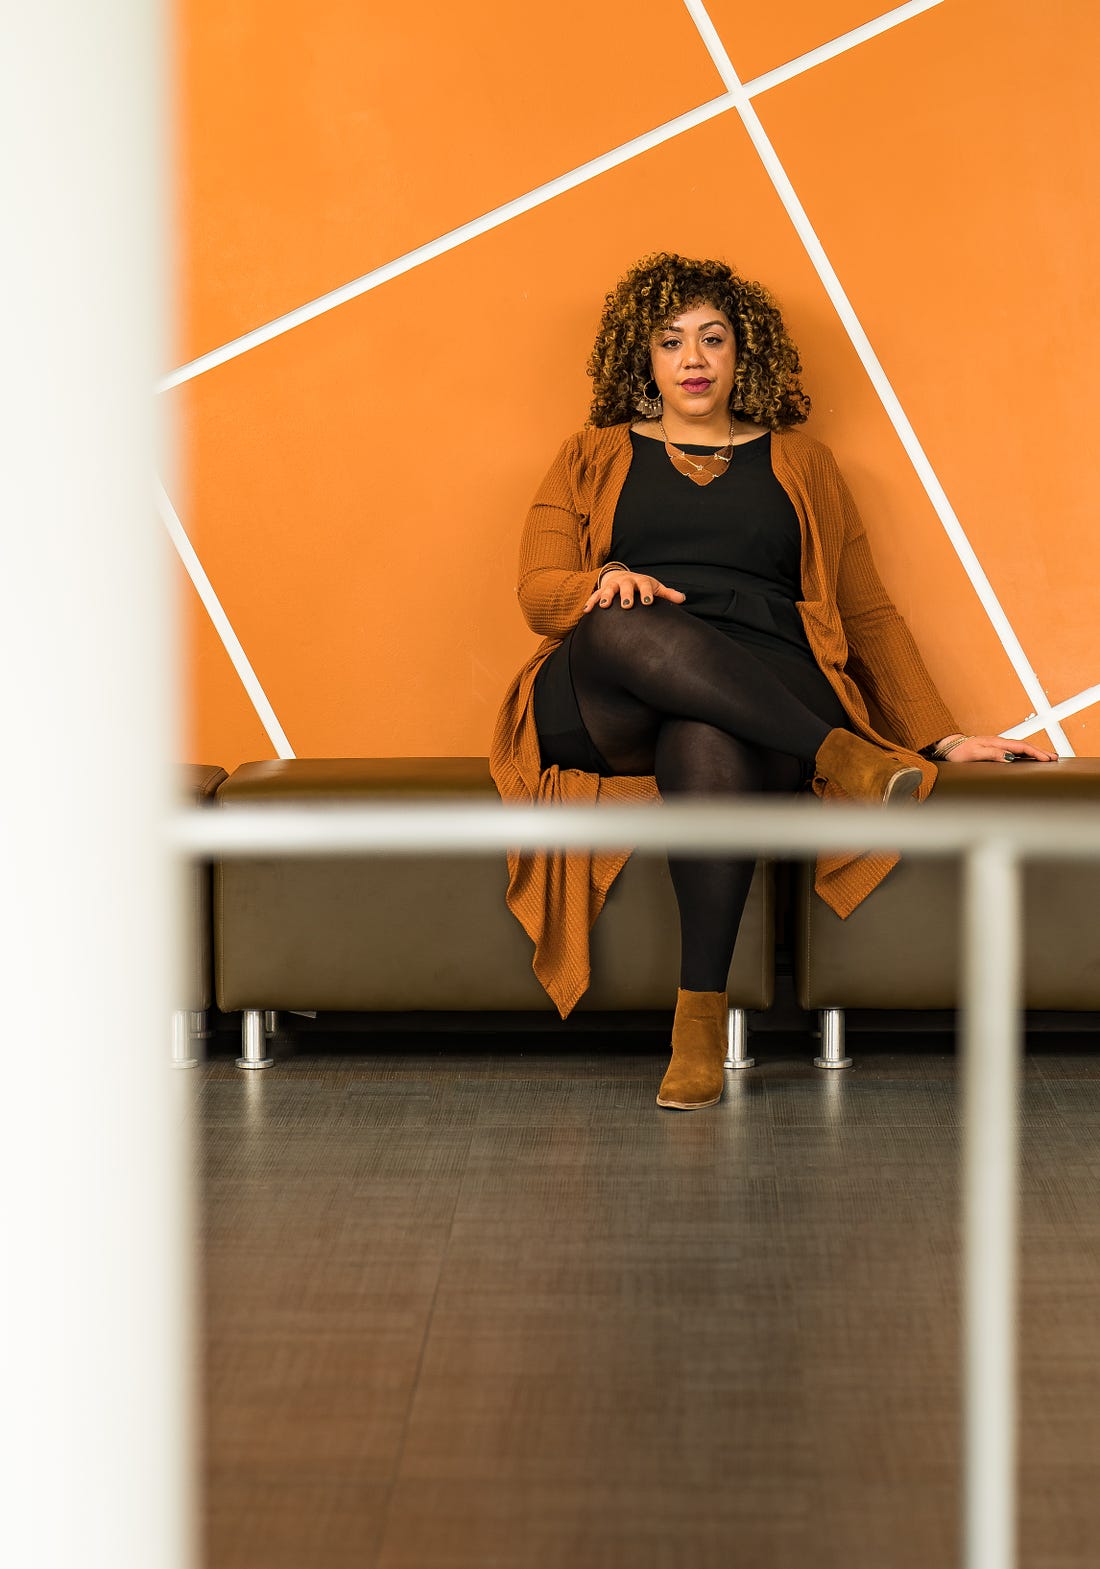 A photo of Dr. Jennifer Mullan sitting on a bench against a wall with with large orange square tiles at an angle.